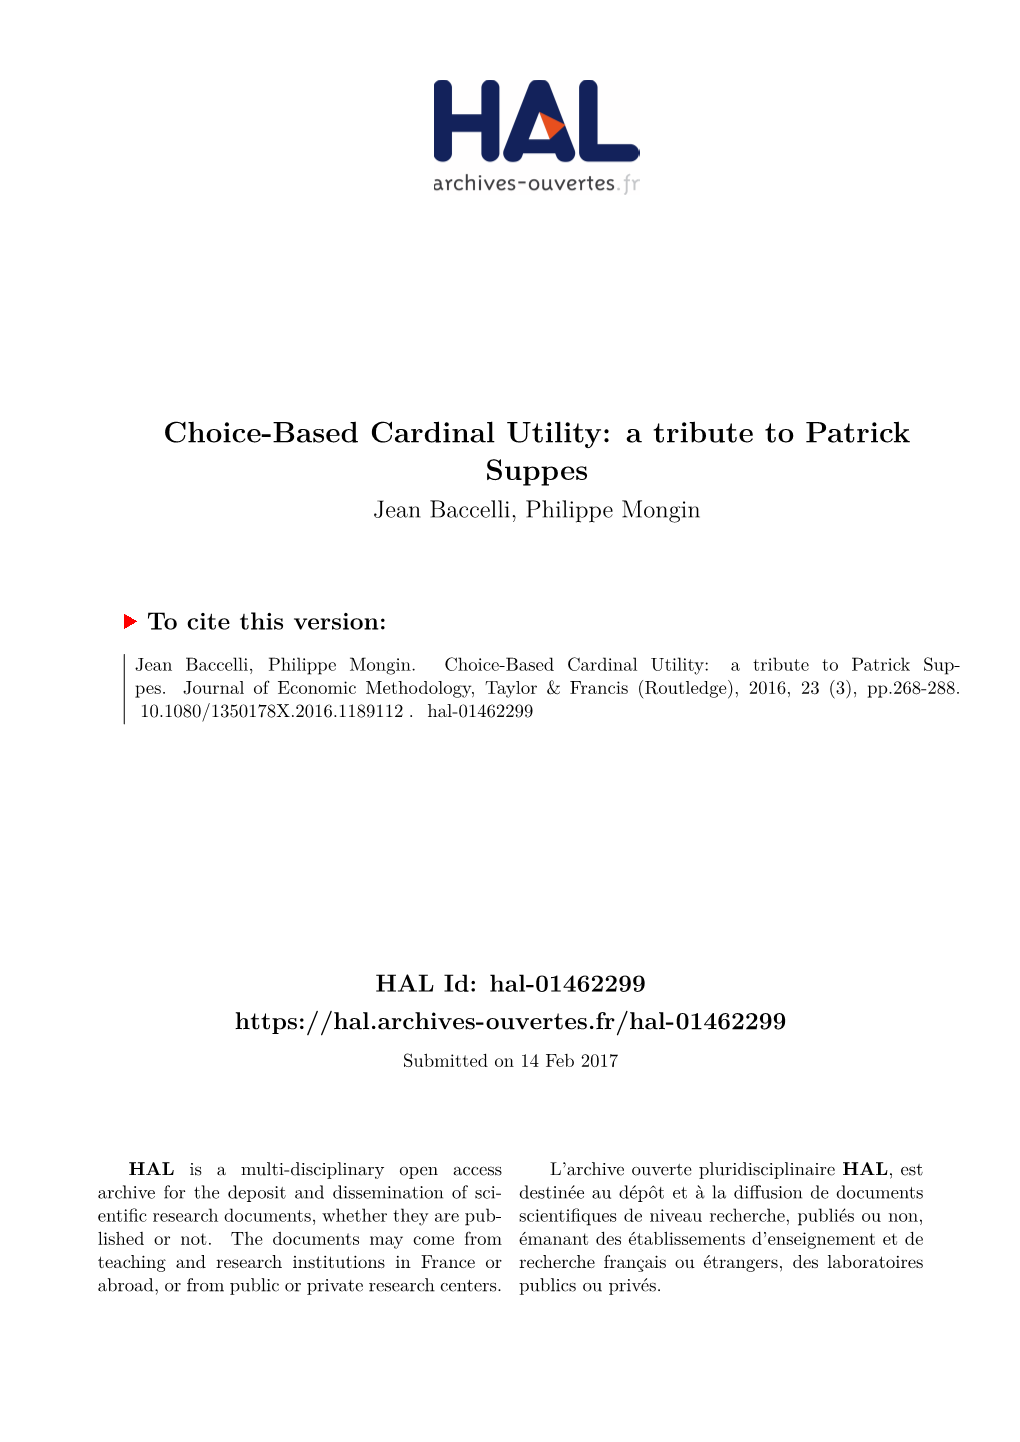 Choice-Based Cardinal Utility: a Tribute to Patrick Suppes Jean Baccelli, Philippe Mongin